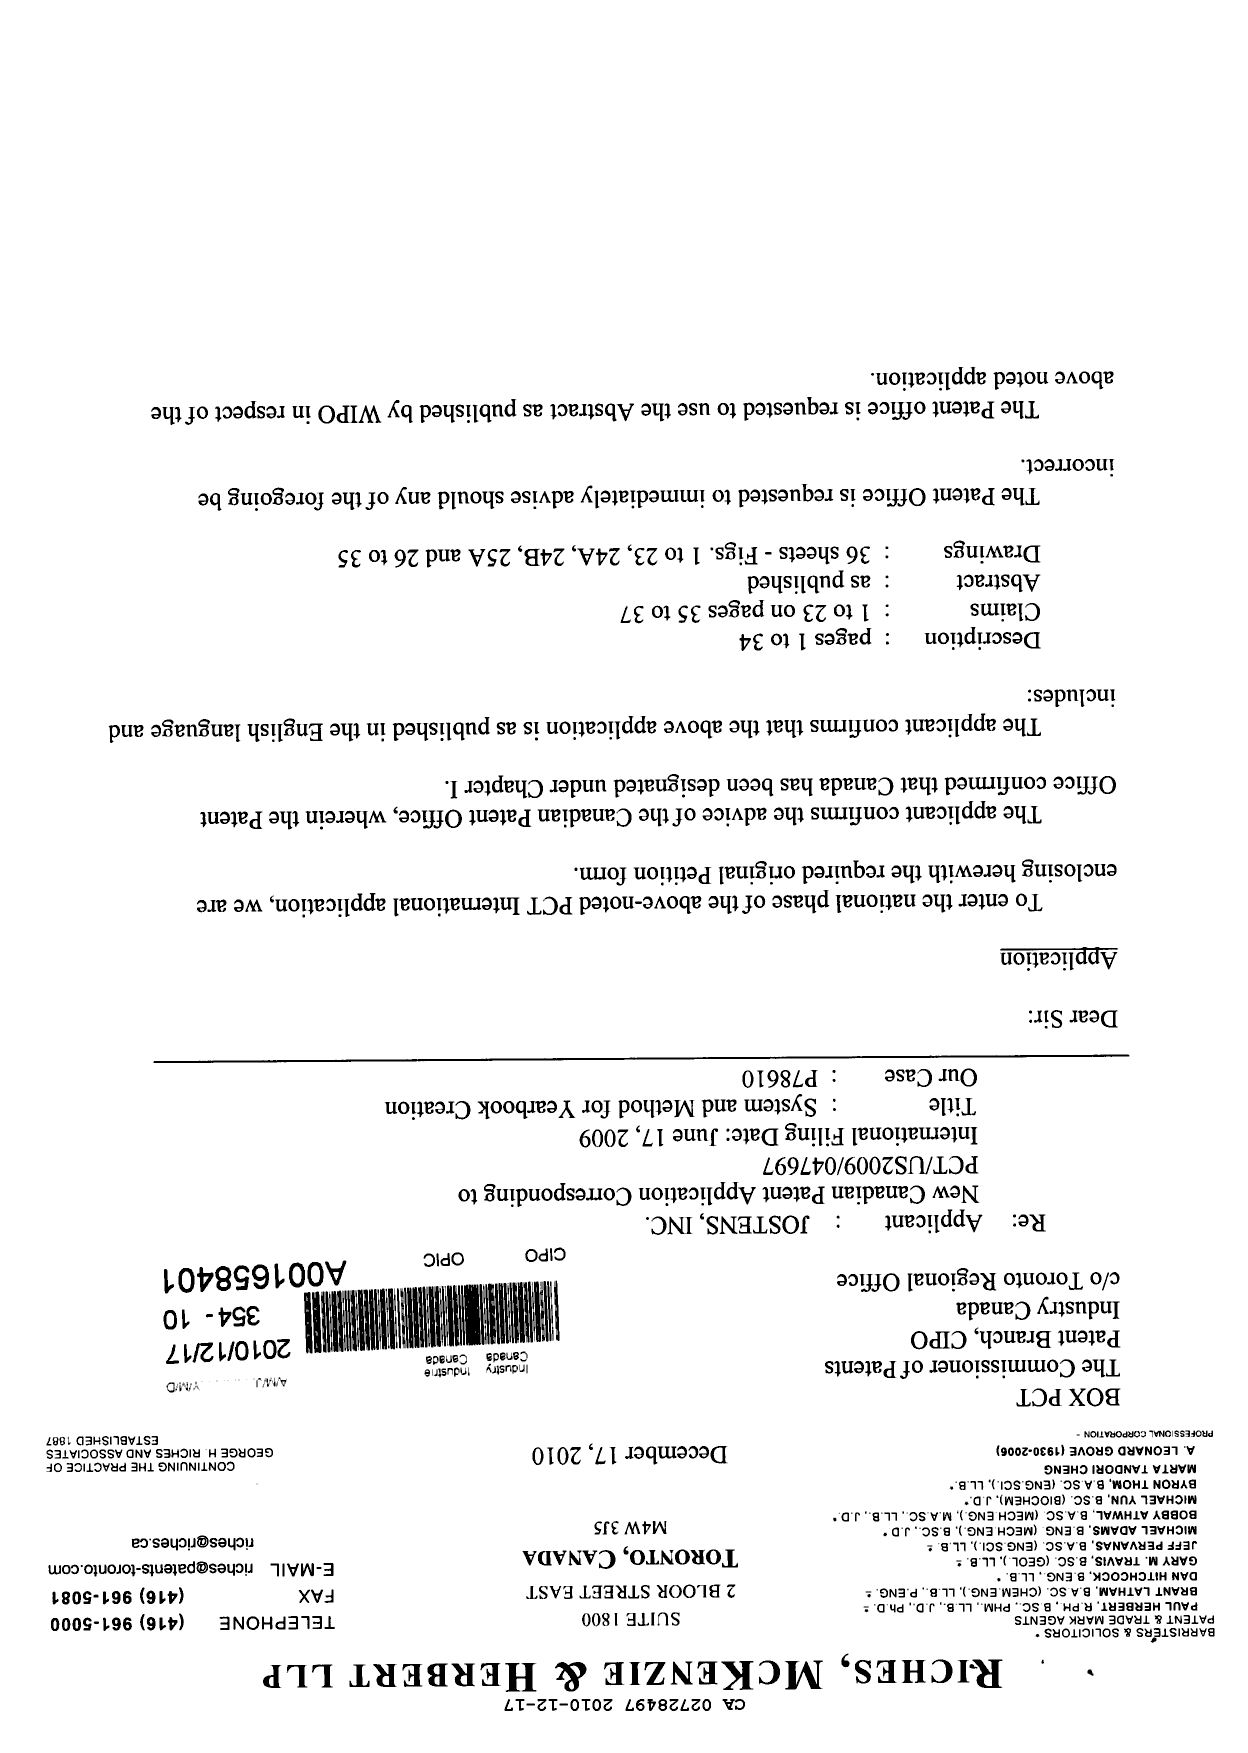 Canadian Patent Document 2728497. Assignment 20091217. Image 1 of 4